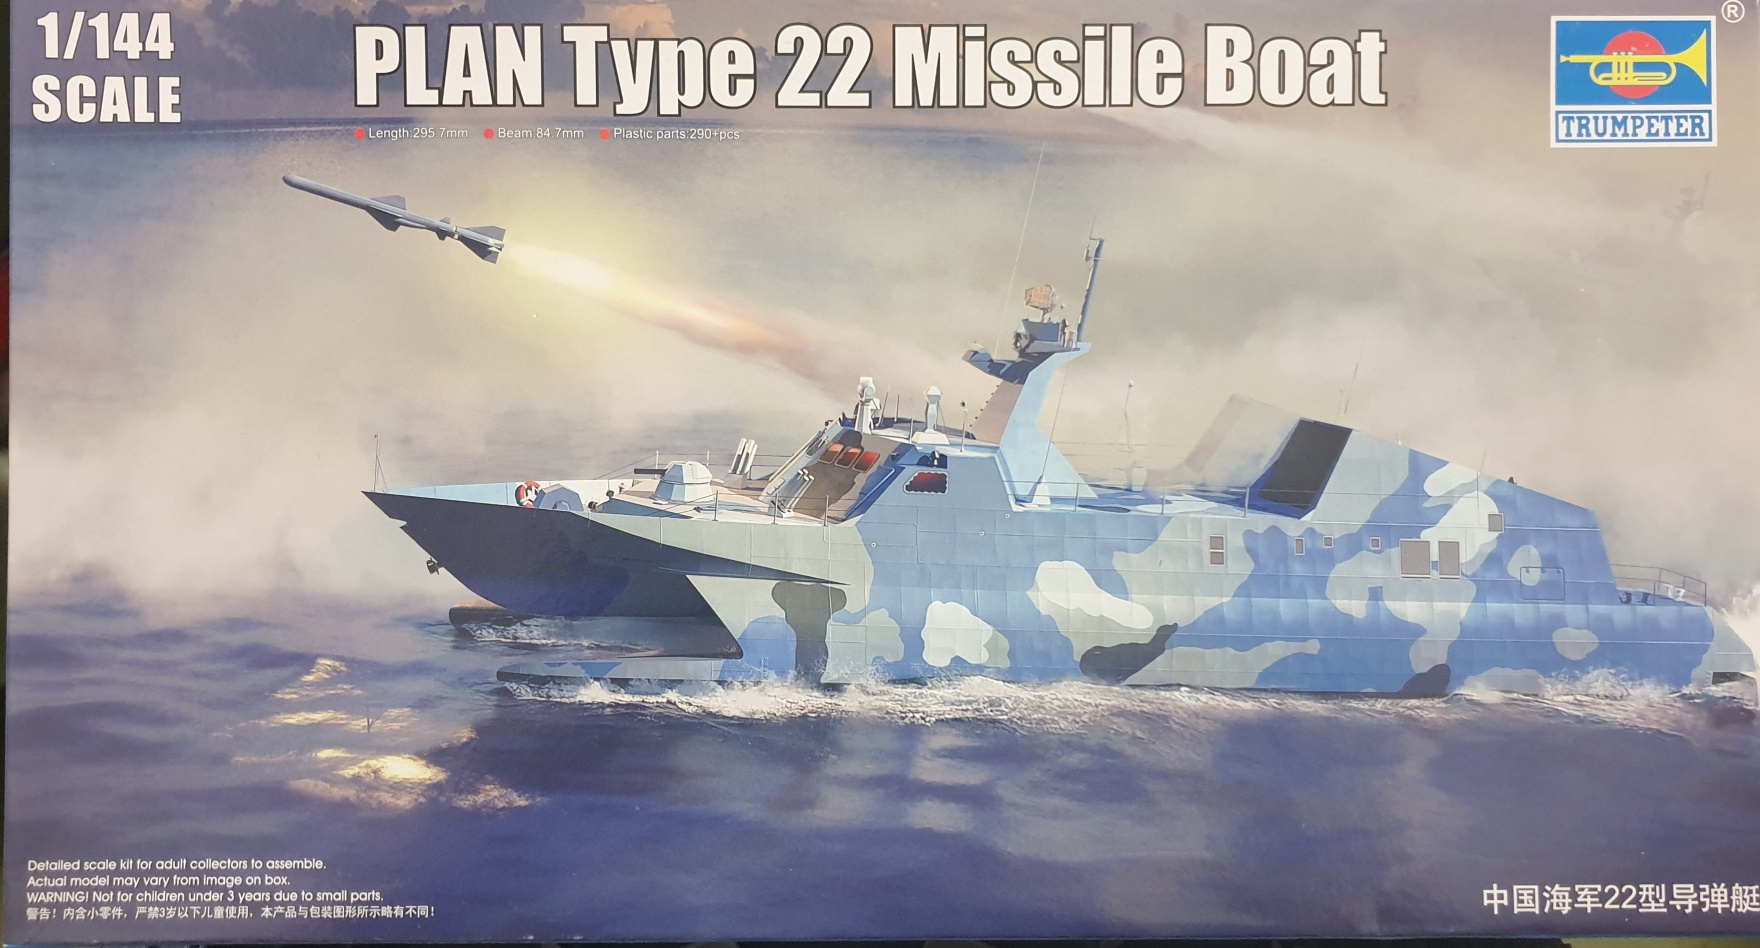 Trumpeter 00108 PLAN Type 22 Missile Boat 1/144 